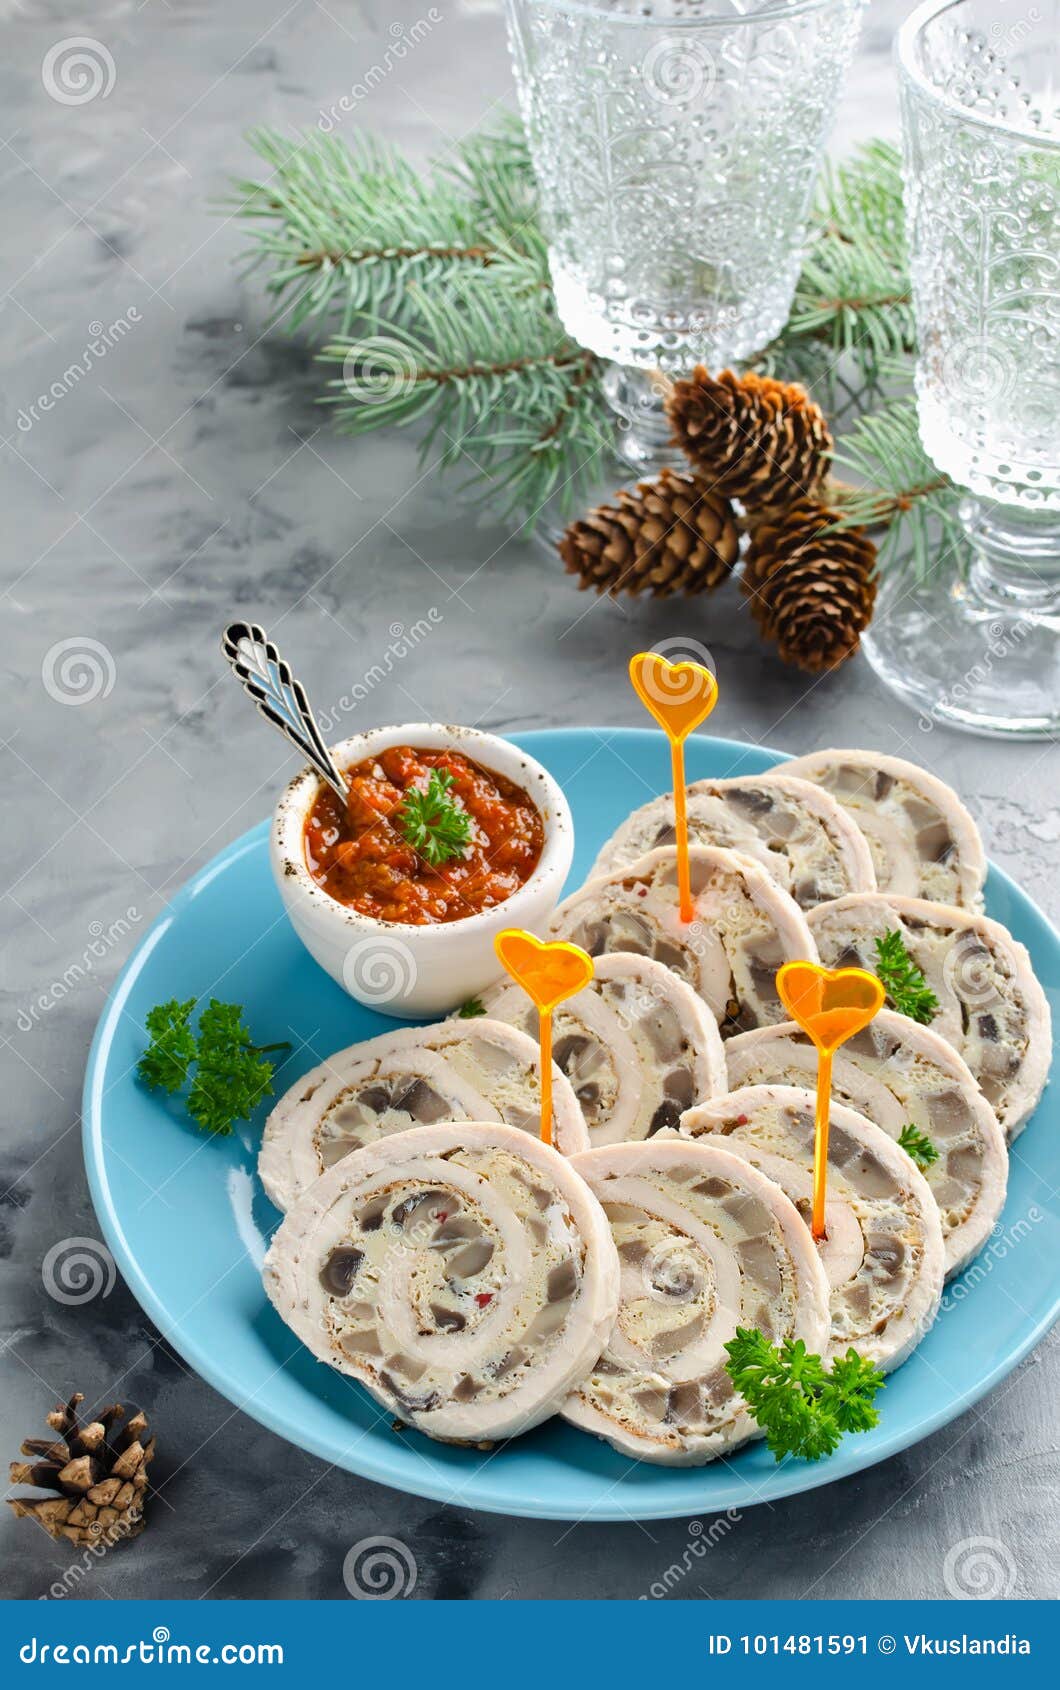 Chicken Roll Roulade with Omelet Omelette and Mushrooms Stock Image ...